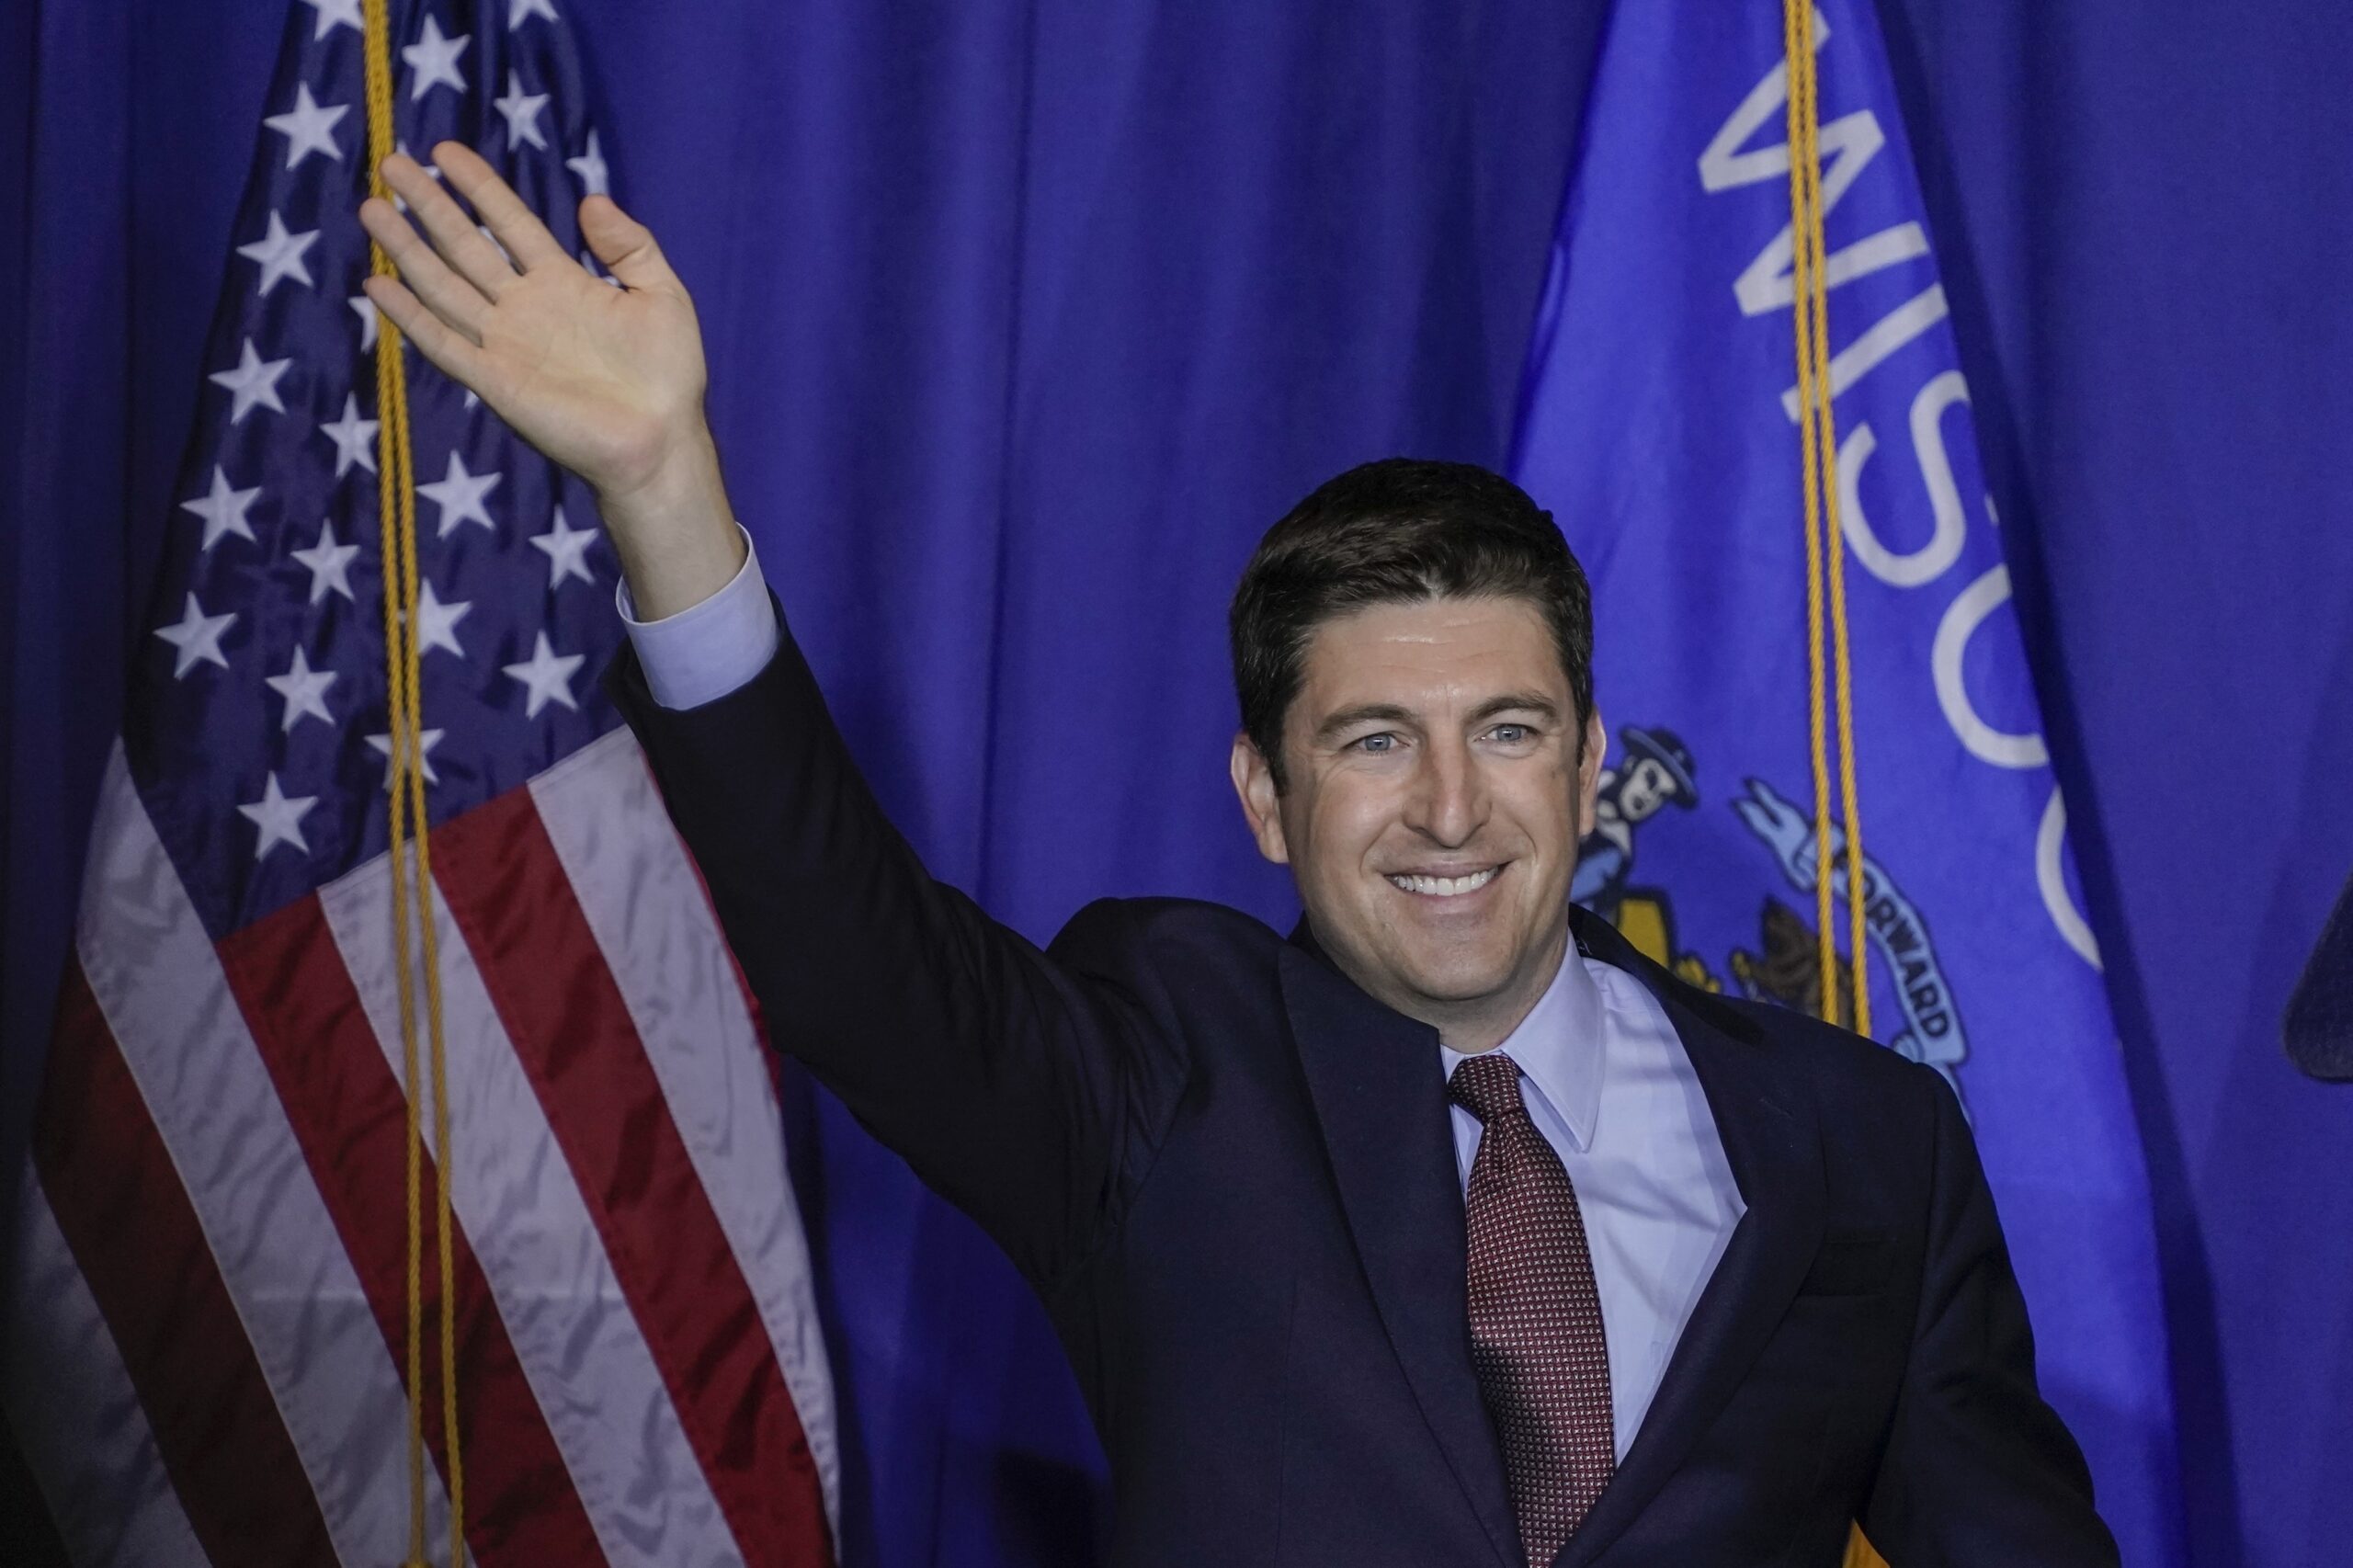 Rep. Bryan Steil waves at a campaign stop for Vice President Mike Pence